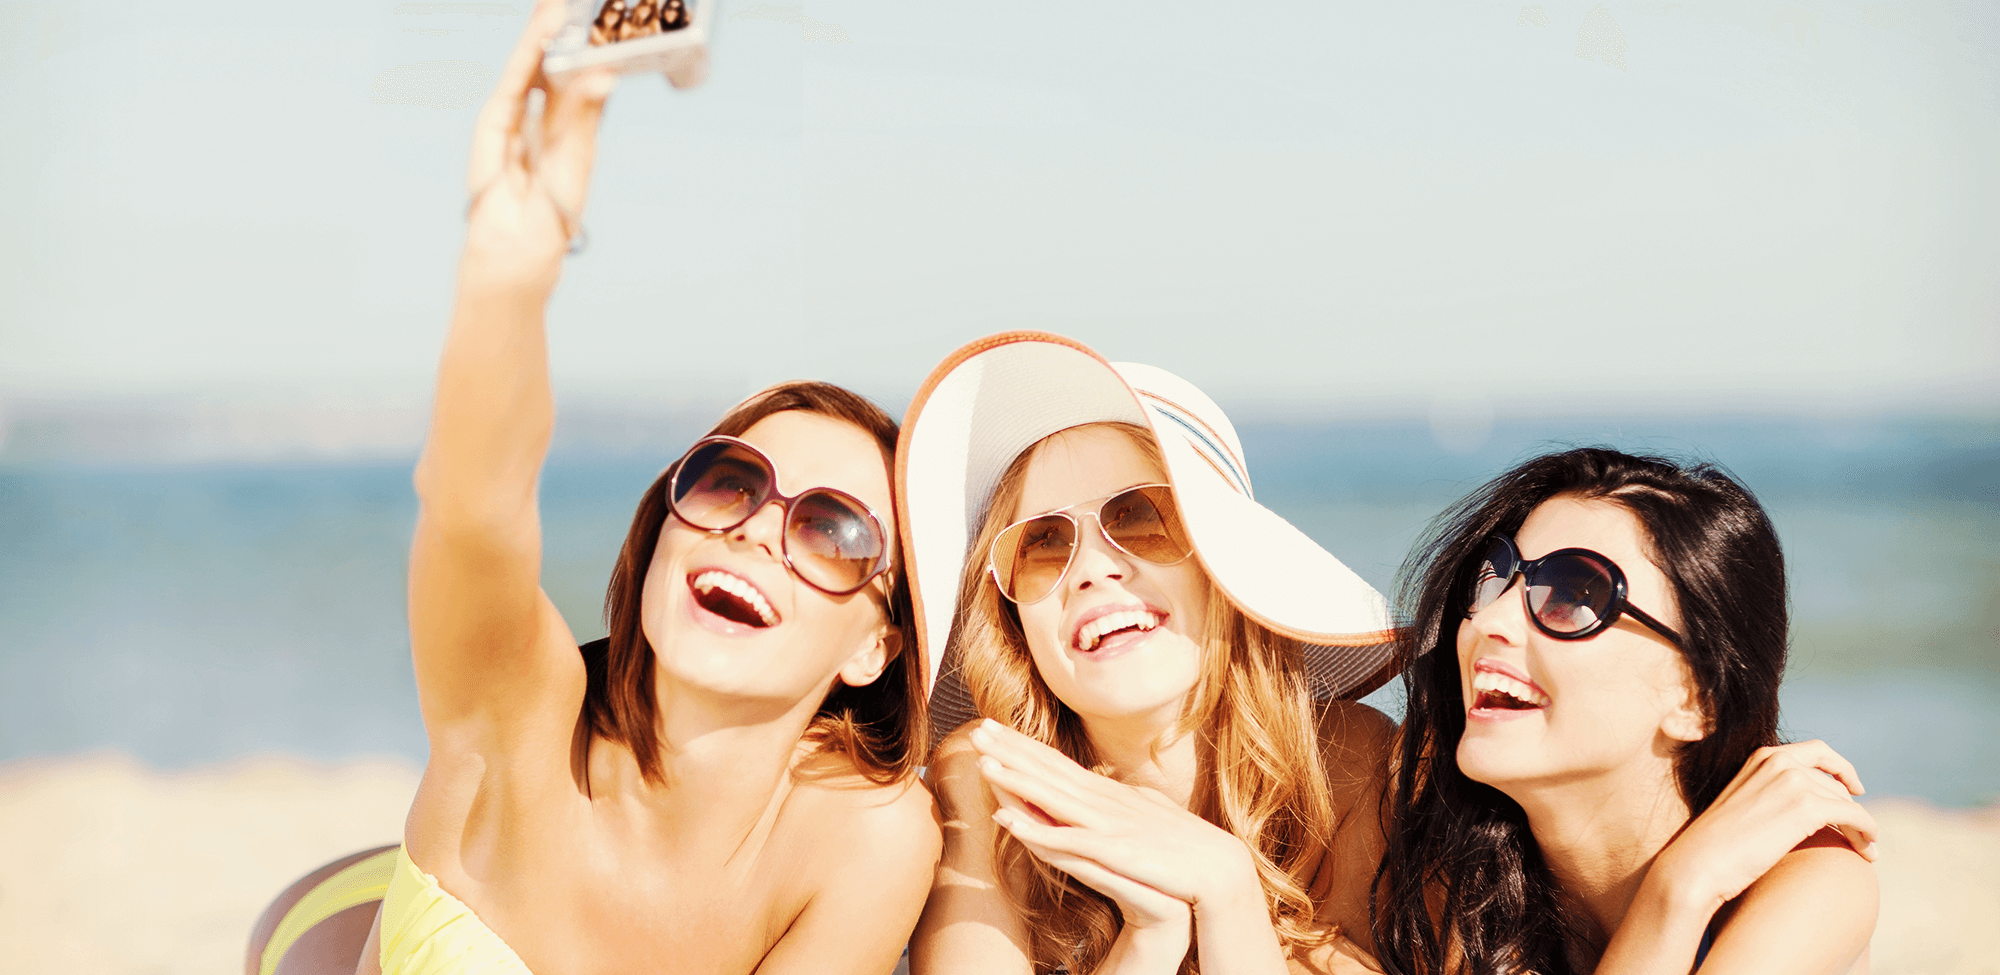 teens take a selfie on the beach, showing their tartar vs plaque free smiles